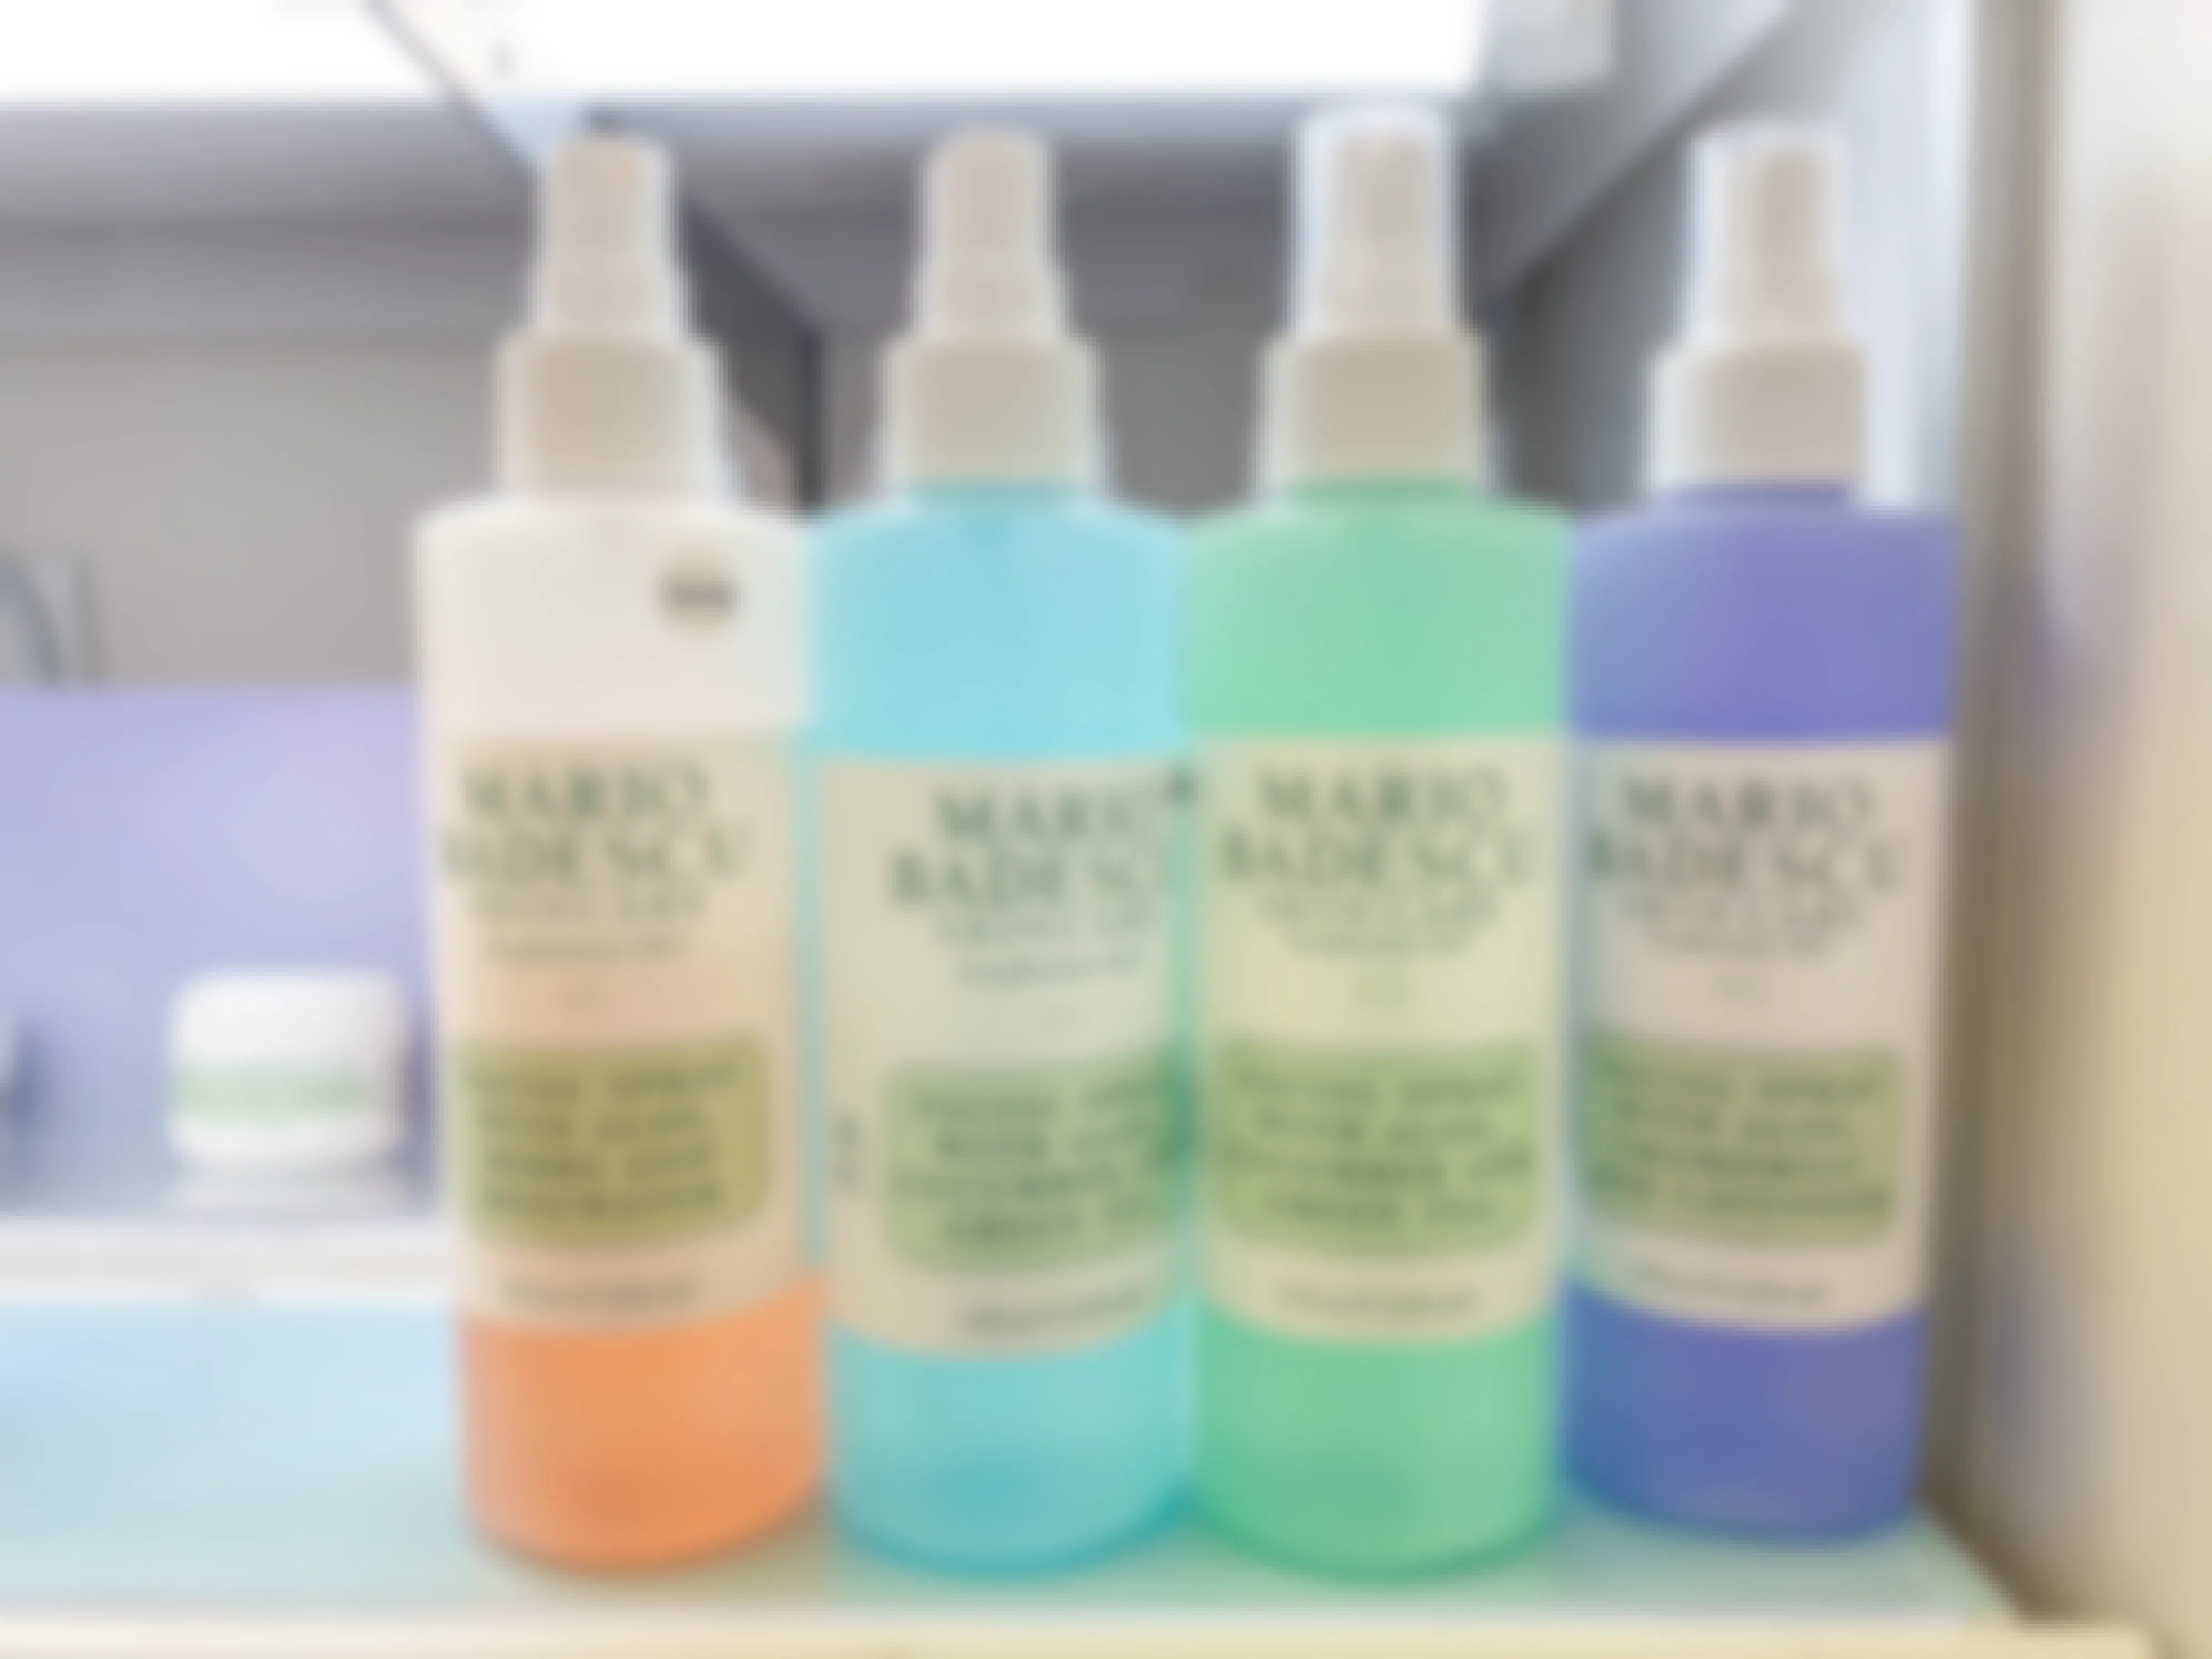 mario badescu facial sprays in different colors lined up